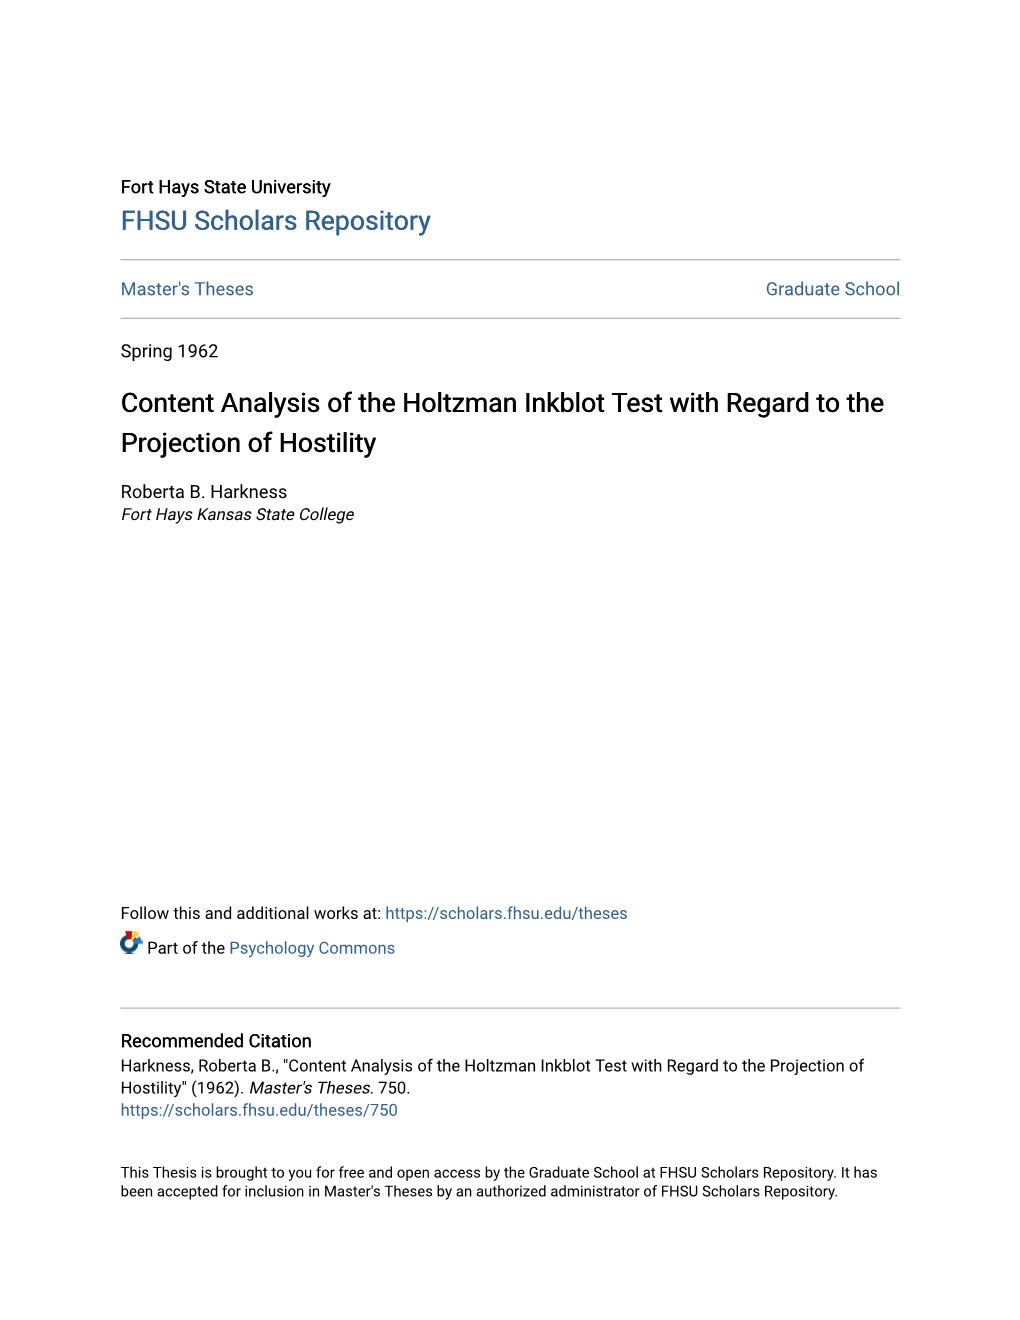 Content Analysis of the Holtzman Inkblot Test with Regard to the Projection of Hostility